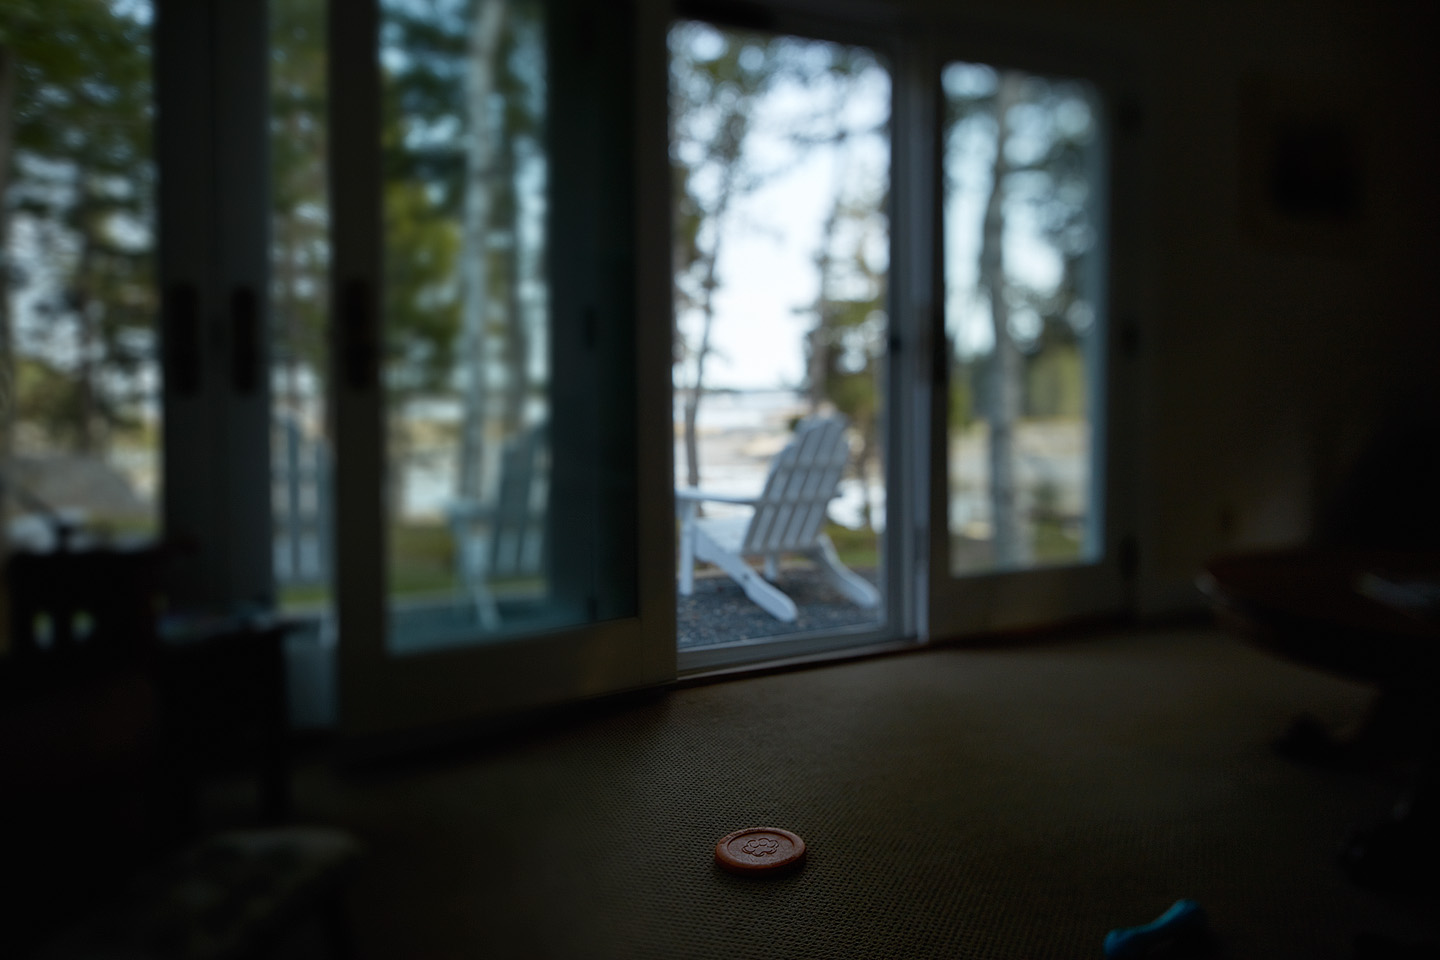 Dog toys. Fish Creek Cove. Canon 5DS R with the 24mm TSE II lens. Deer Isle, ME. August, 2015.